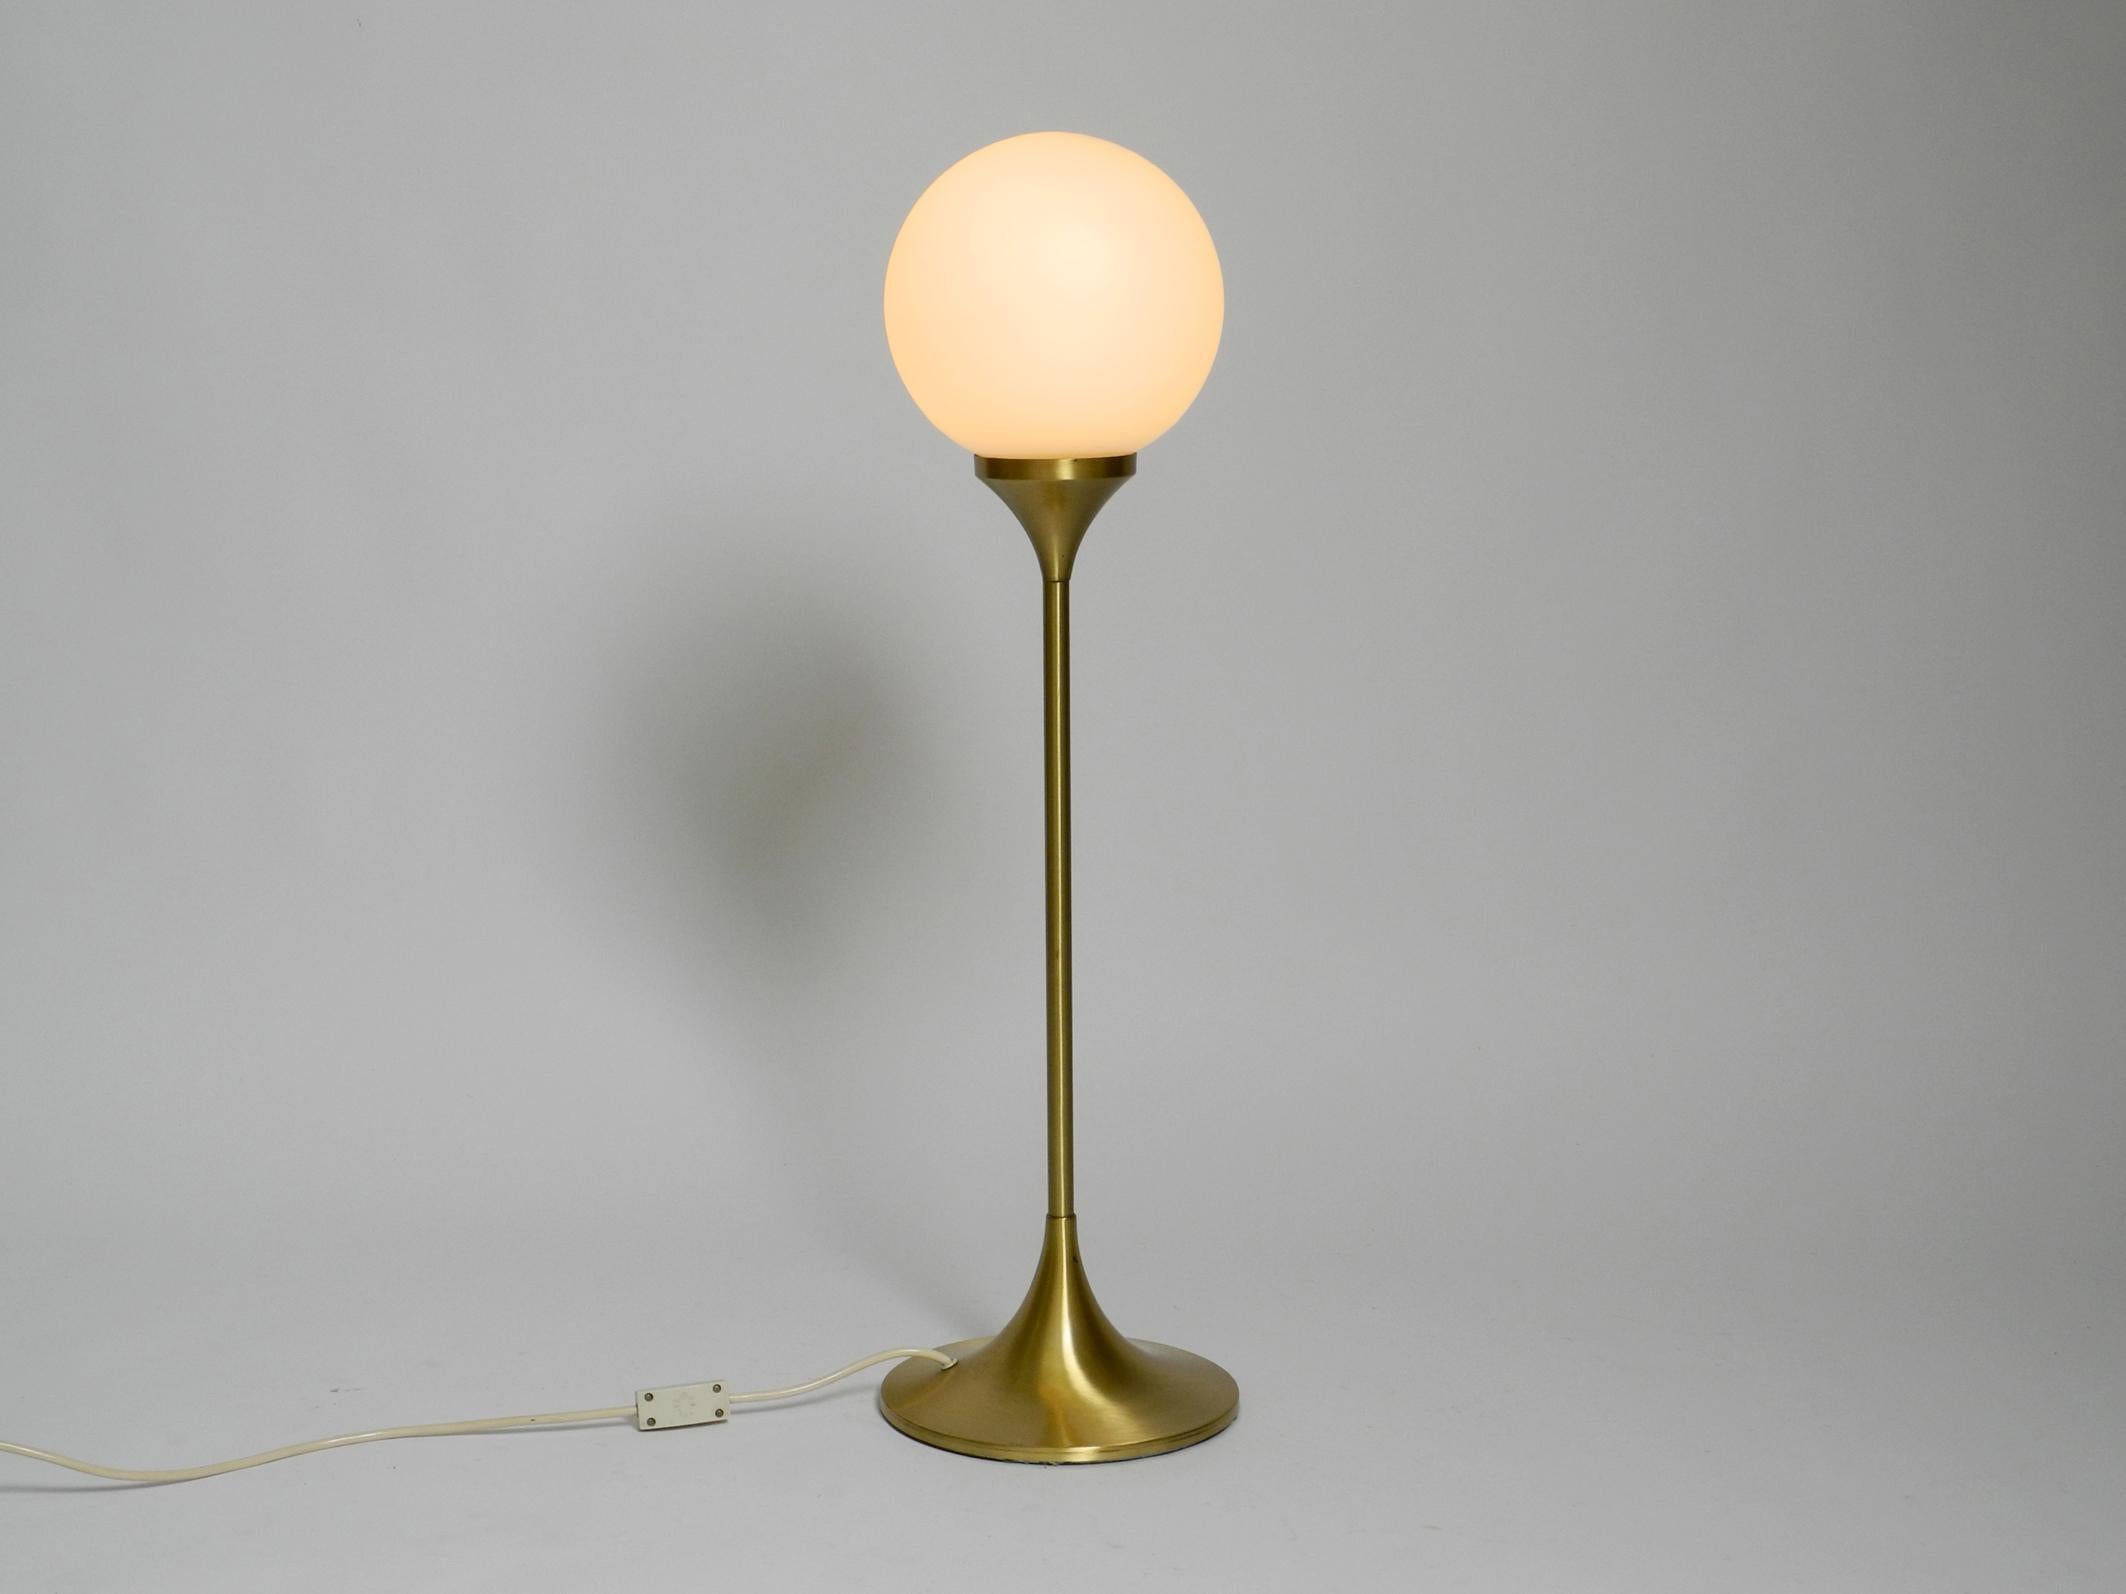 Beautiful large 1960s heavy metal table or floor lamp in brass color.
The manufacturer is Sölken Leuchten. Made in Germany.
White frosted glass lampshade. Makes a very nice soft light.
Great Mid Century Space Age design with lots of details and very